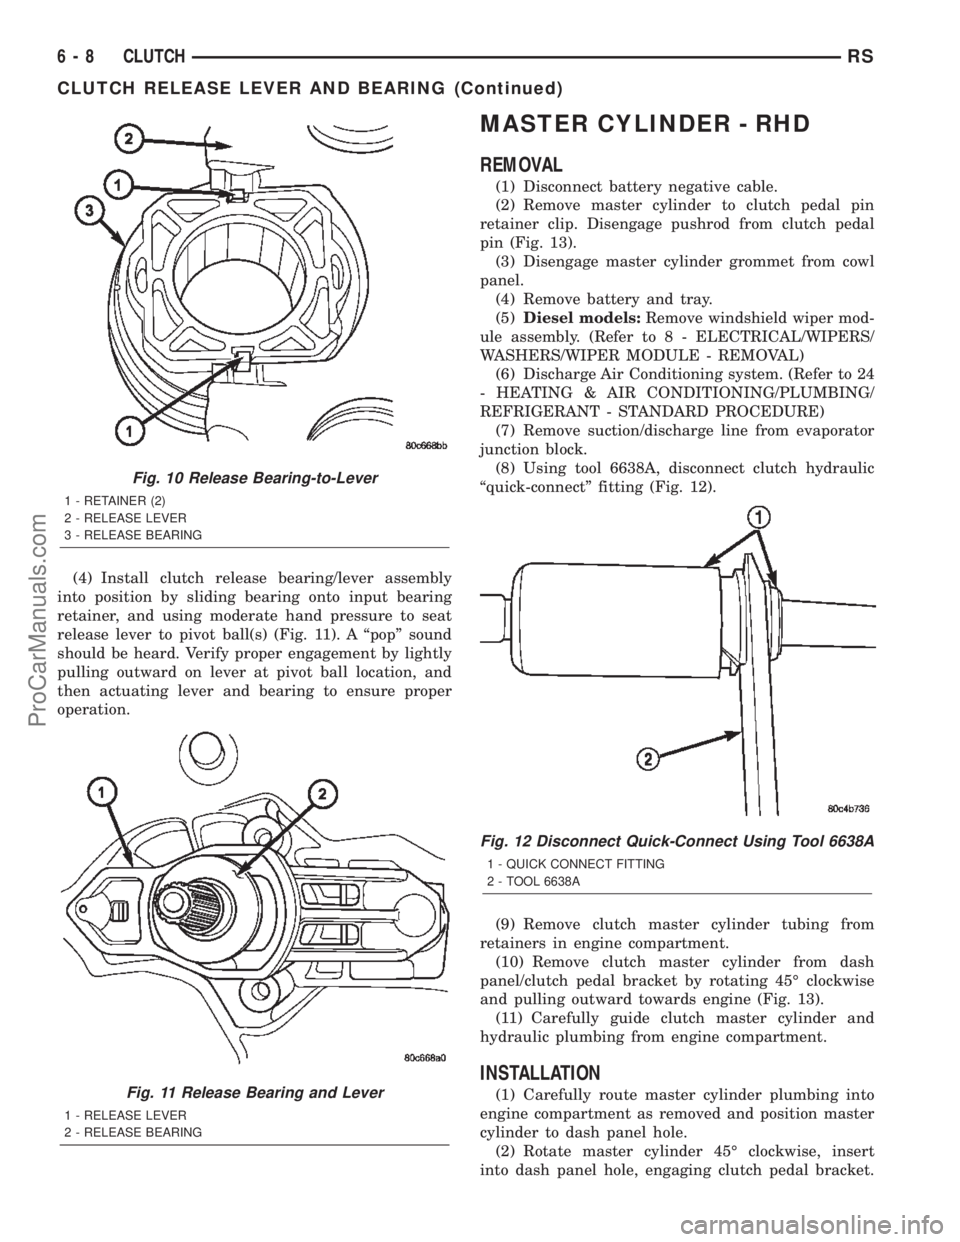 CHRYSLER TOWN AND COUNTRY 2002  Service Manual (4) Install clutch release bearing/lever assembly
into position by sliding bearing onto input bearing
retainer, and using moderate hand pressure to seat
release lever to pivot ball(s) (Fig. 11). A ªp